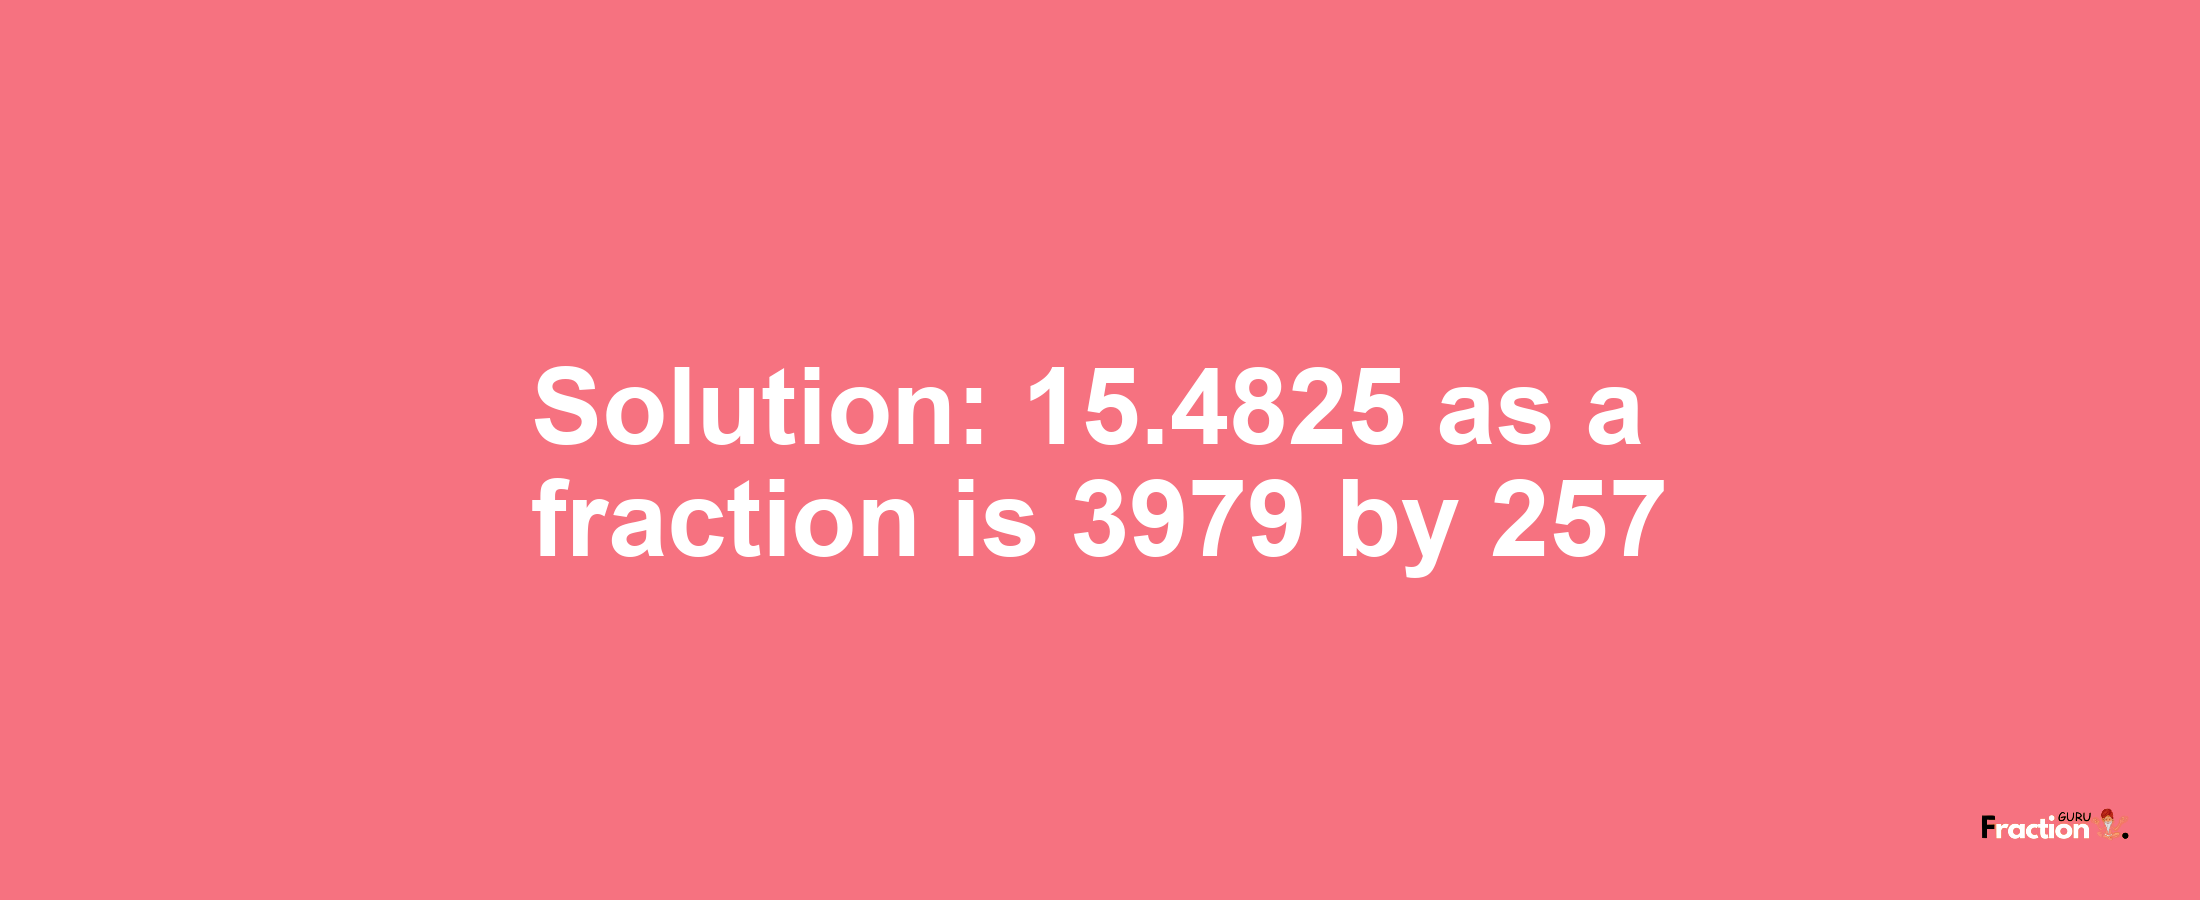 Solution:15.4825 as a fraction is 3979/257